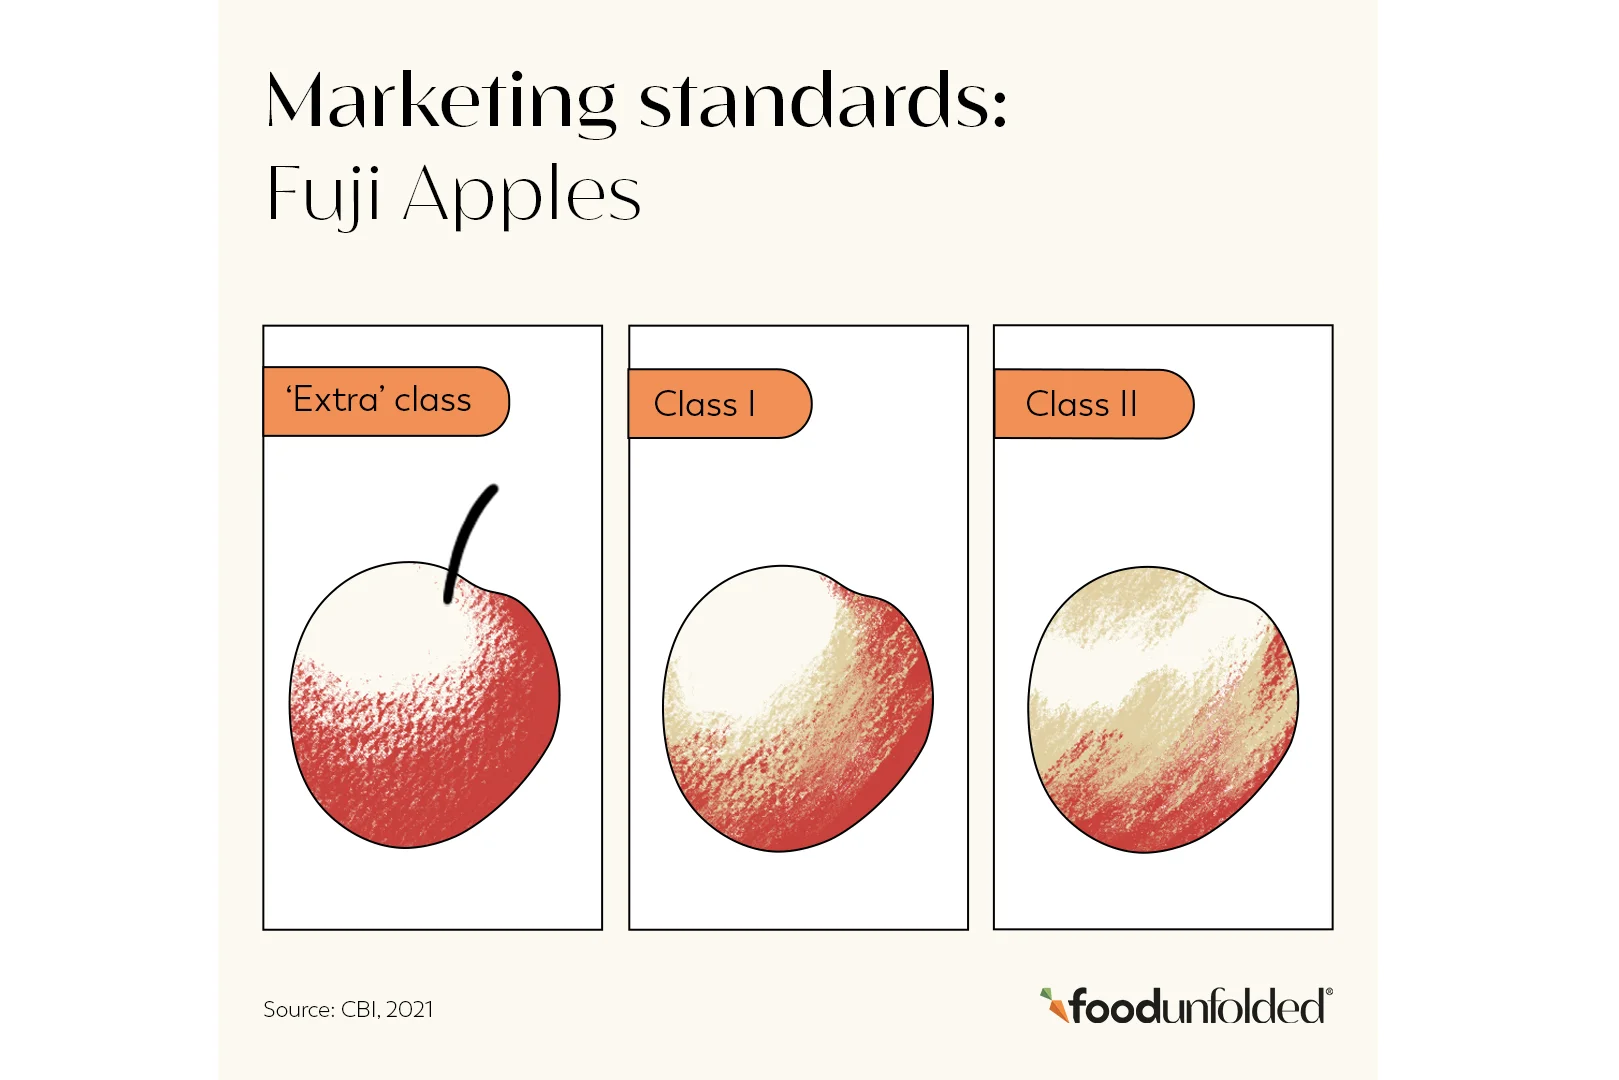 Fuji apples can be sold as “Extra” class only if stalks are intact and at least half of the fruit skin is red, among a few other features.